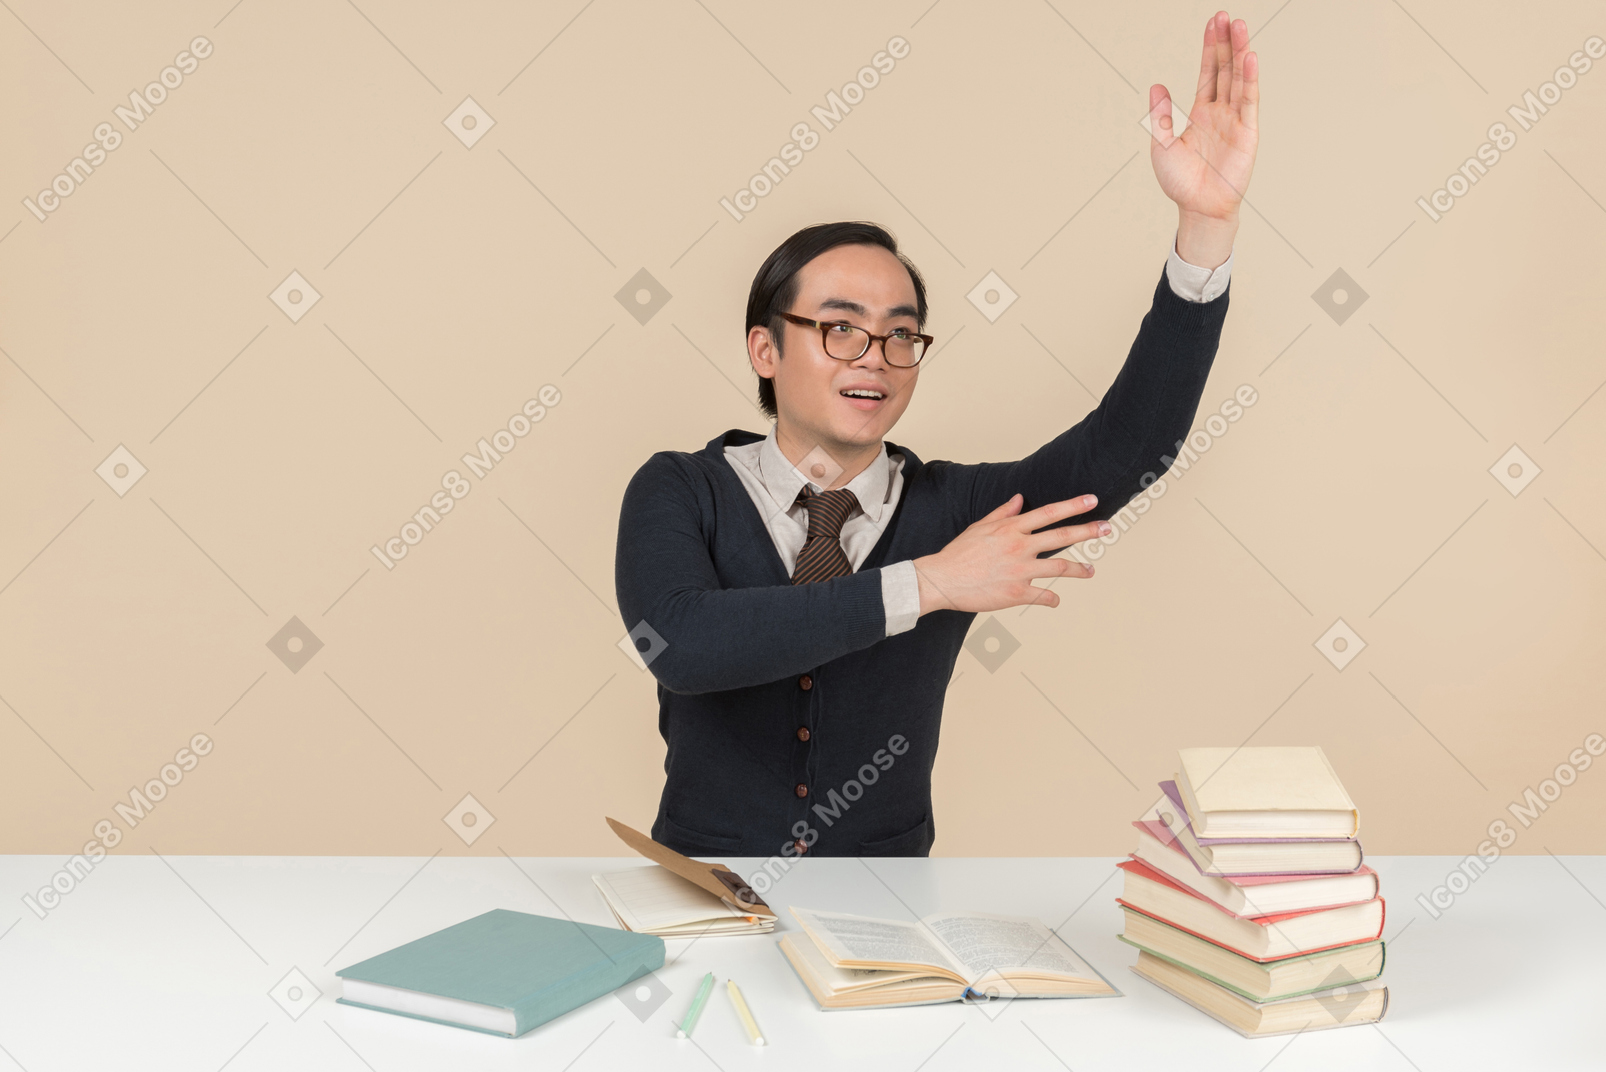 Young asian student in a sweater raising his hand